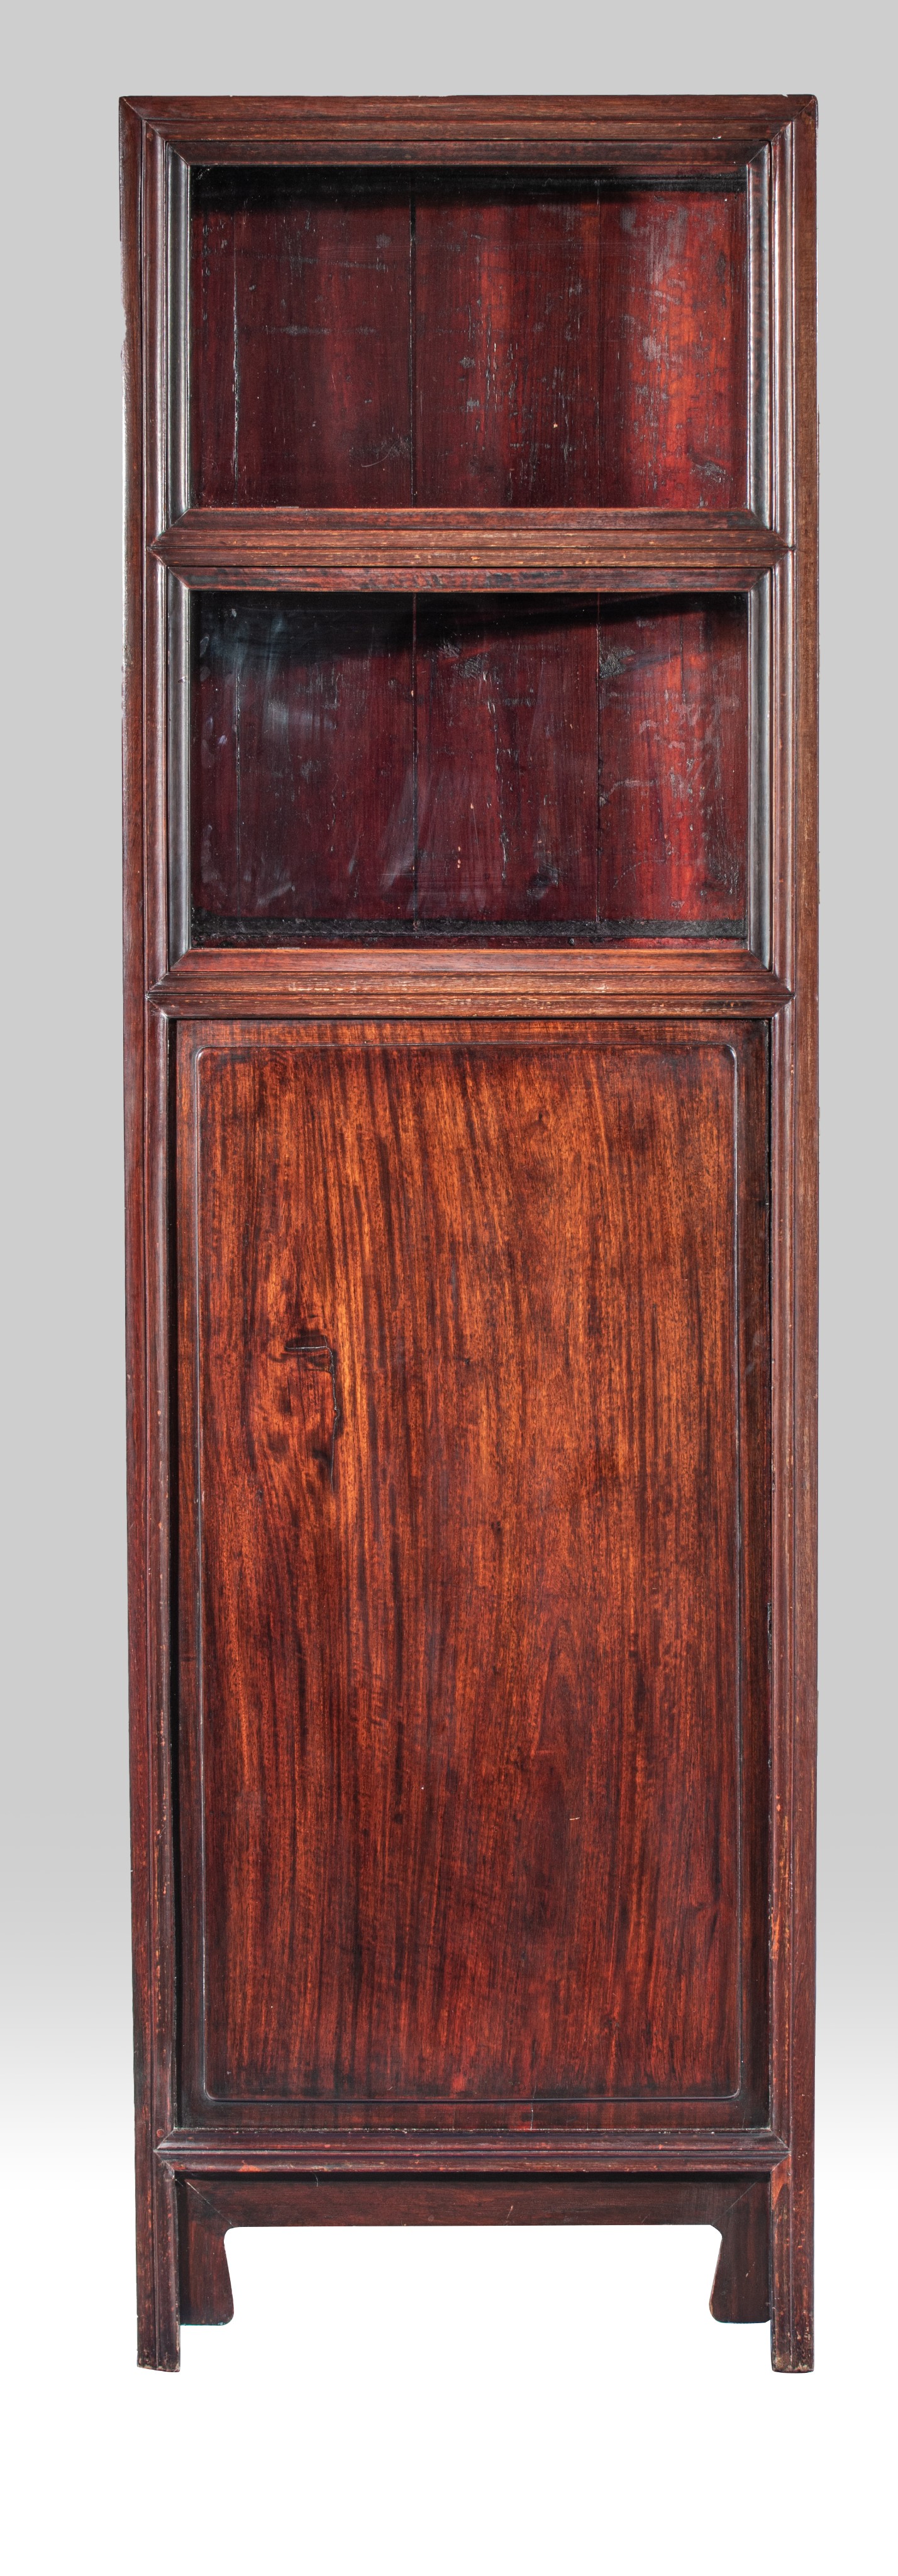 A Chinese hardwood display cabinet, H 174 - W 105 - D 52 cm - Image 7 of 9